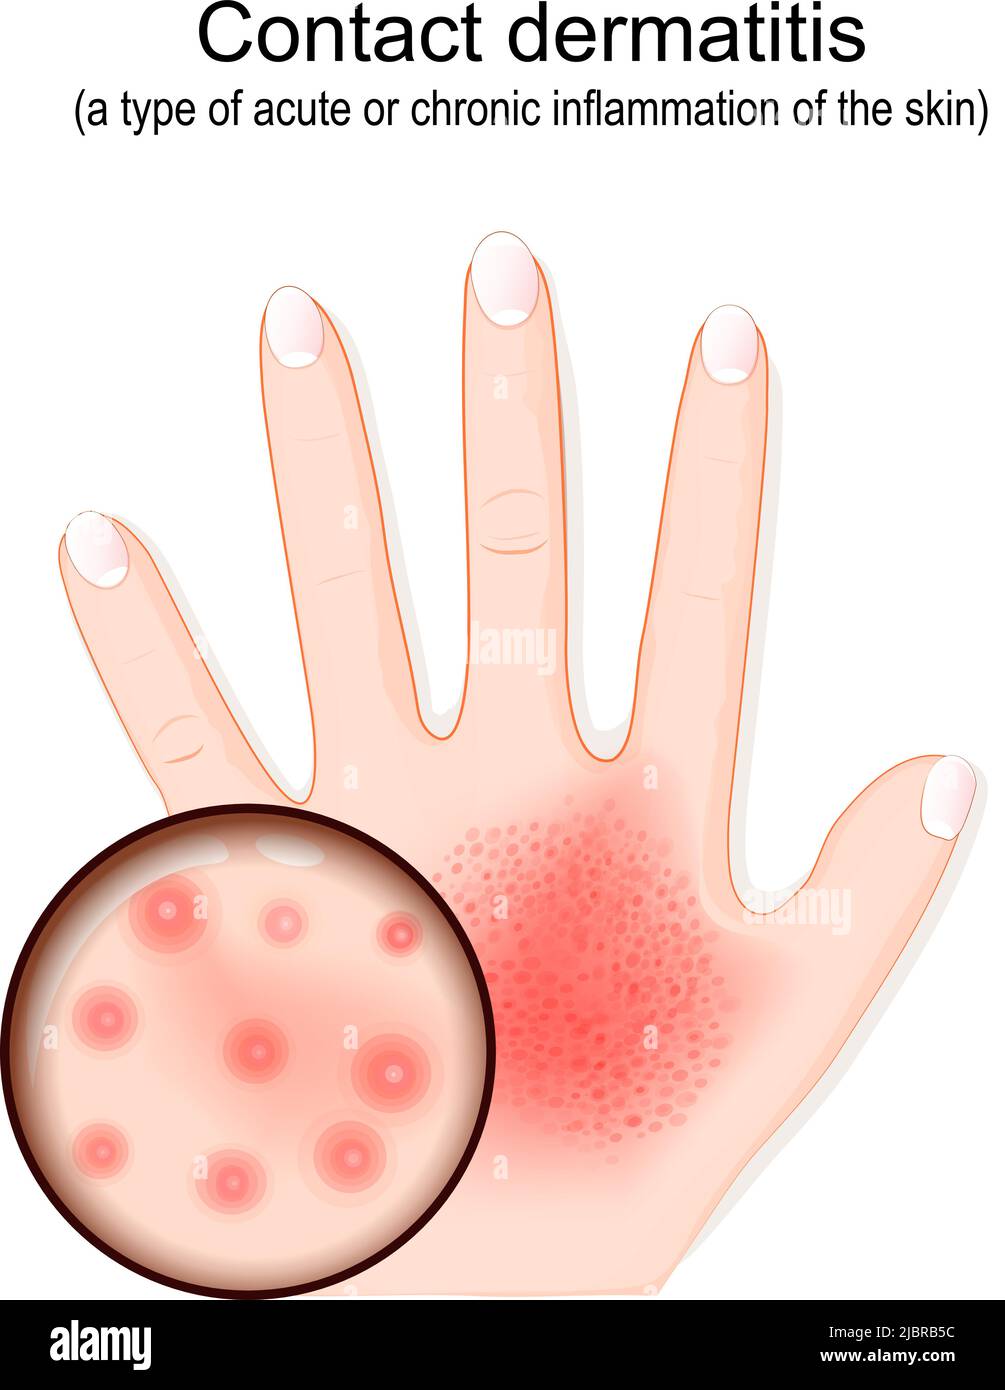 Contact dermatitis. Atopic eczema. Close-up of rash on hand. human skin with dermatitis. penetration of allergens. Vector illustration Stock Vector